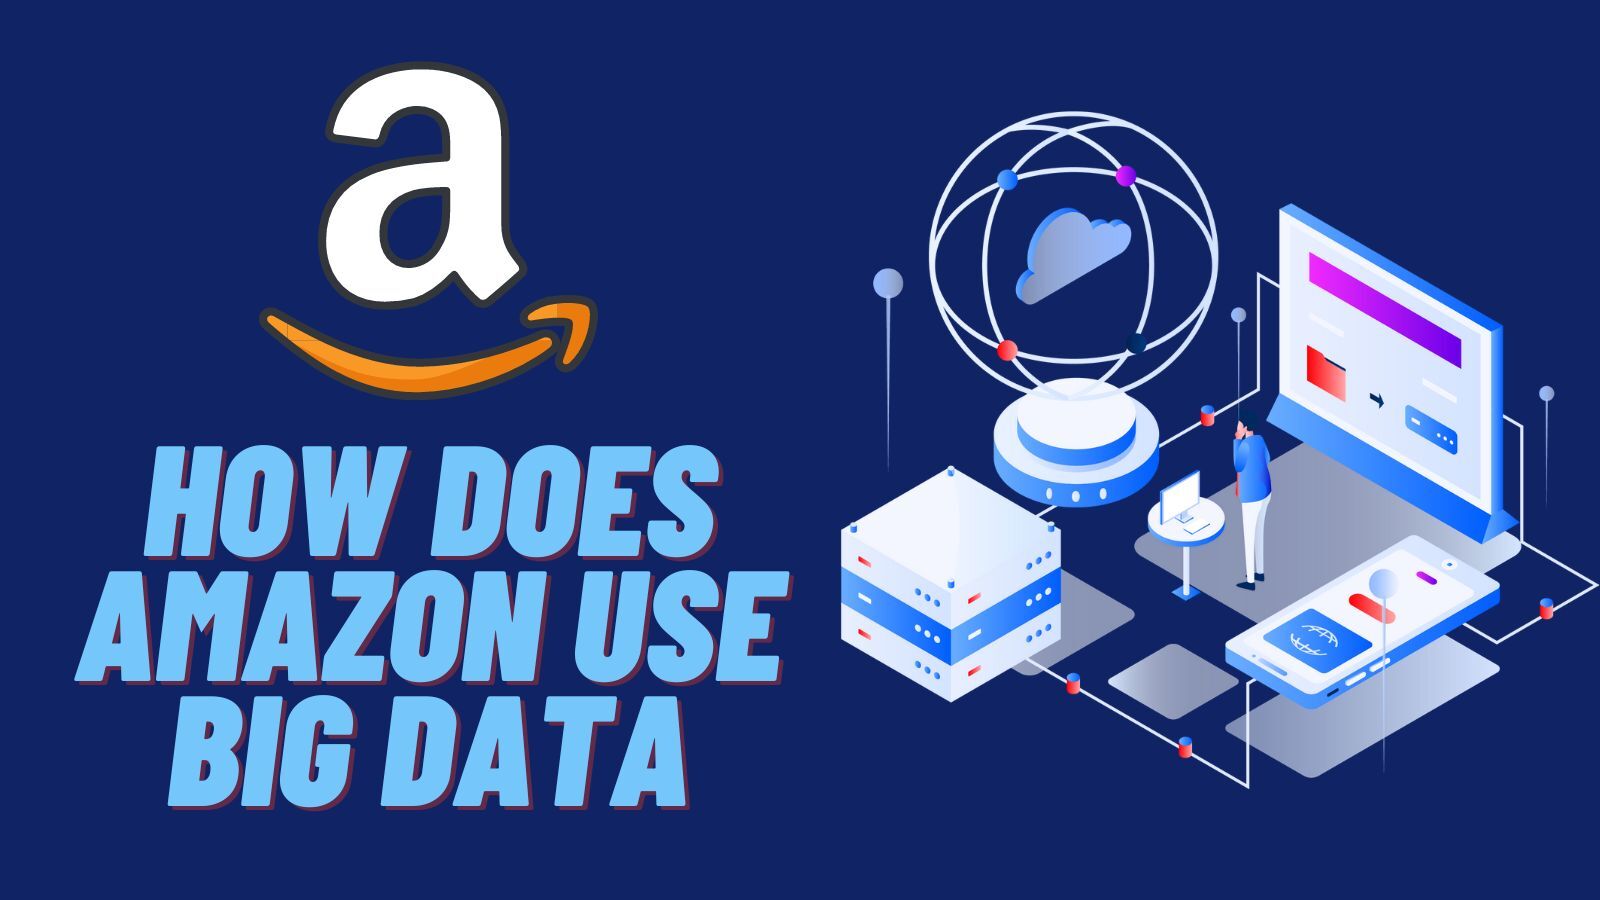 How Does Amazon Use Big Data? (Target, Modes and Tools)